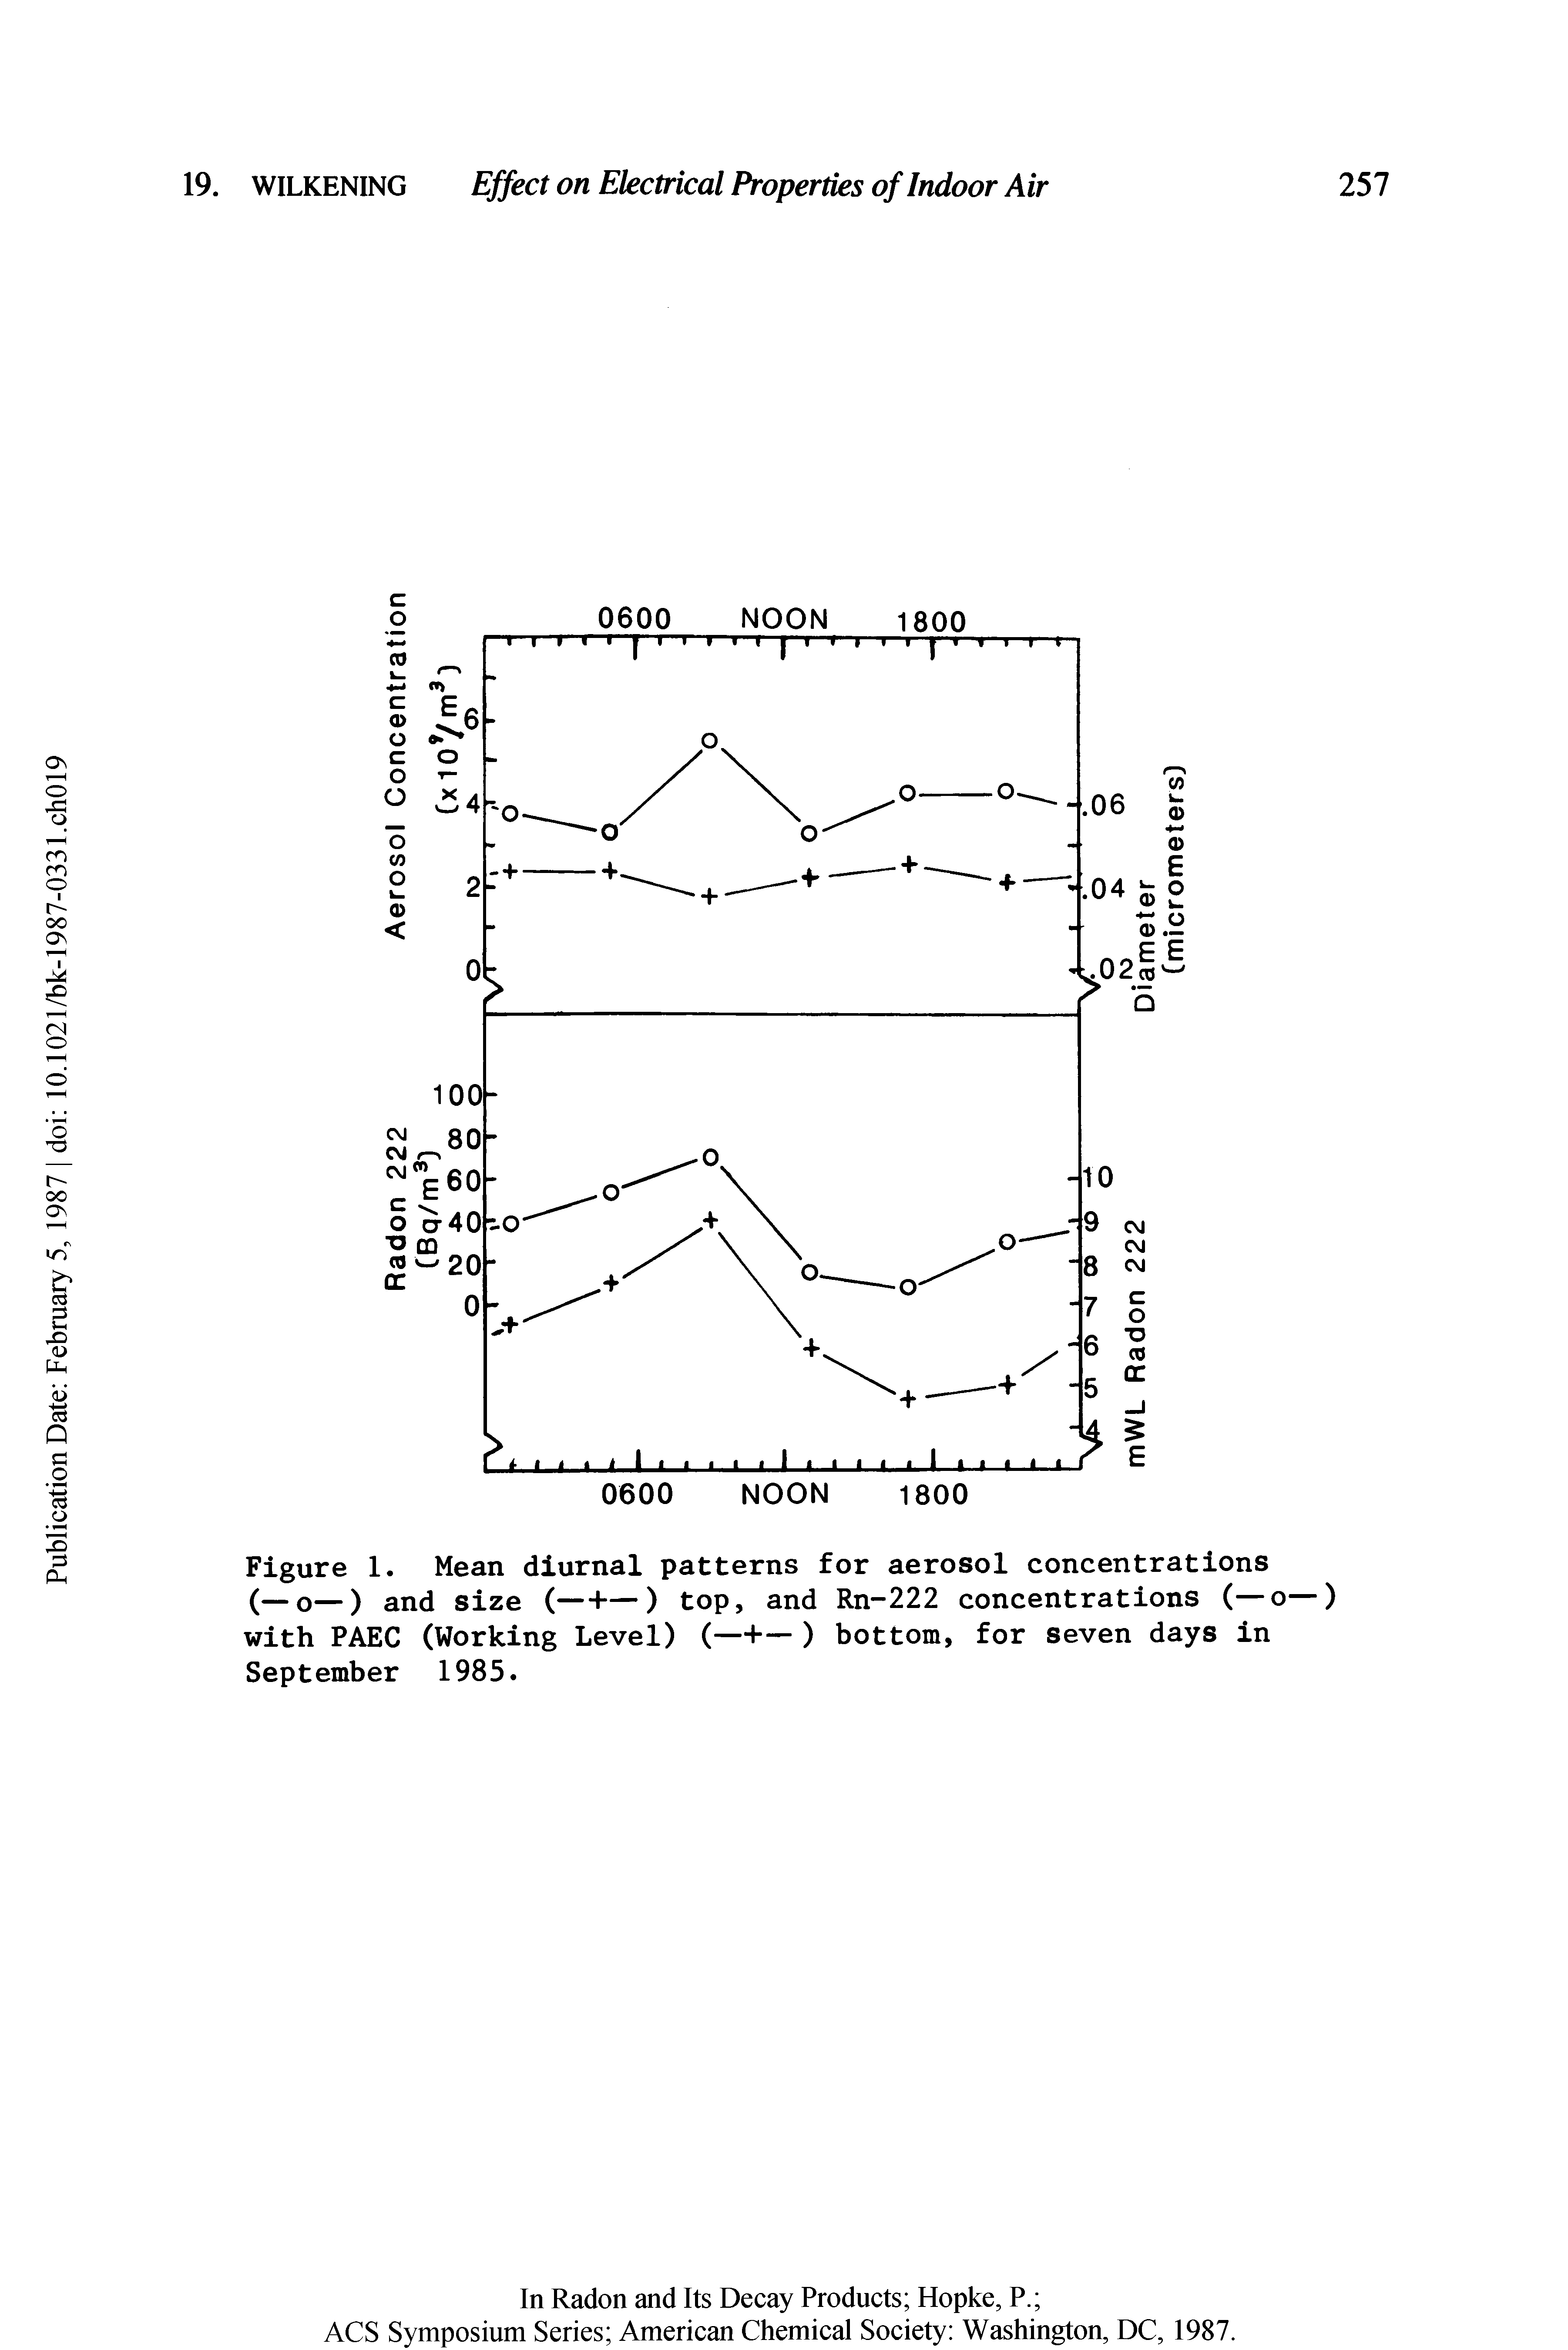 Figure 1. Mean diurnal patterns for aerosol concentrations (—o—) and size (—+—) top, and Rn-222 concentrations (—o—) with PAEC (Working Level) (—H— ) bottom, for seven days in September 1985.